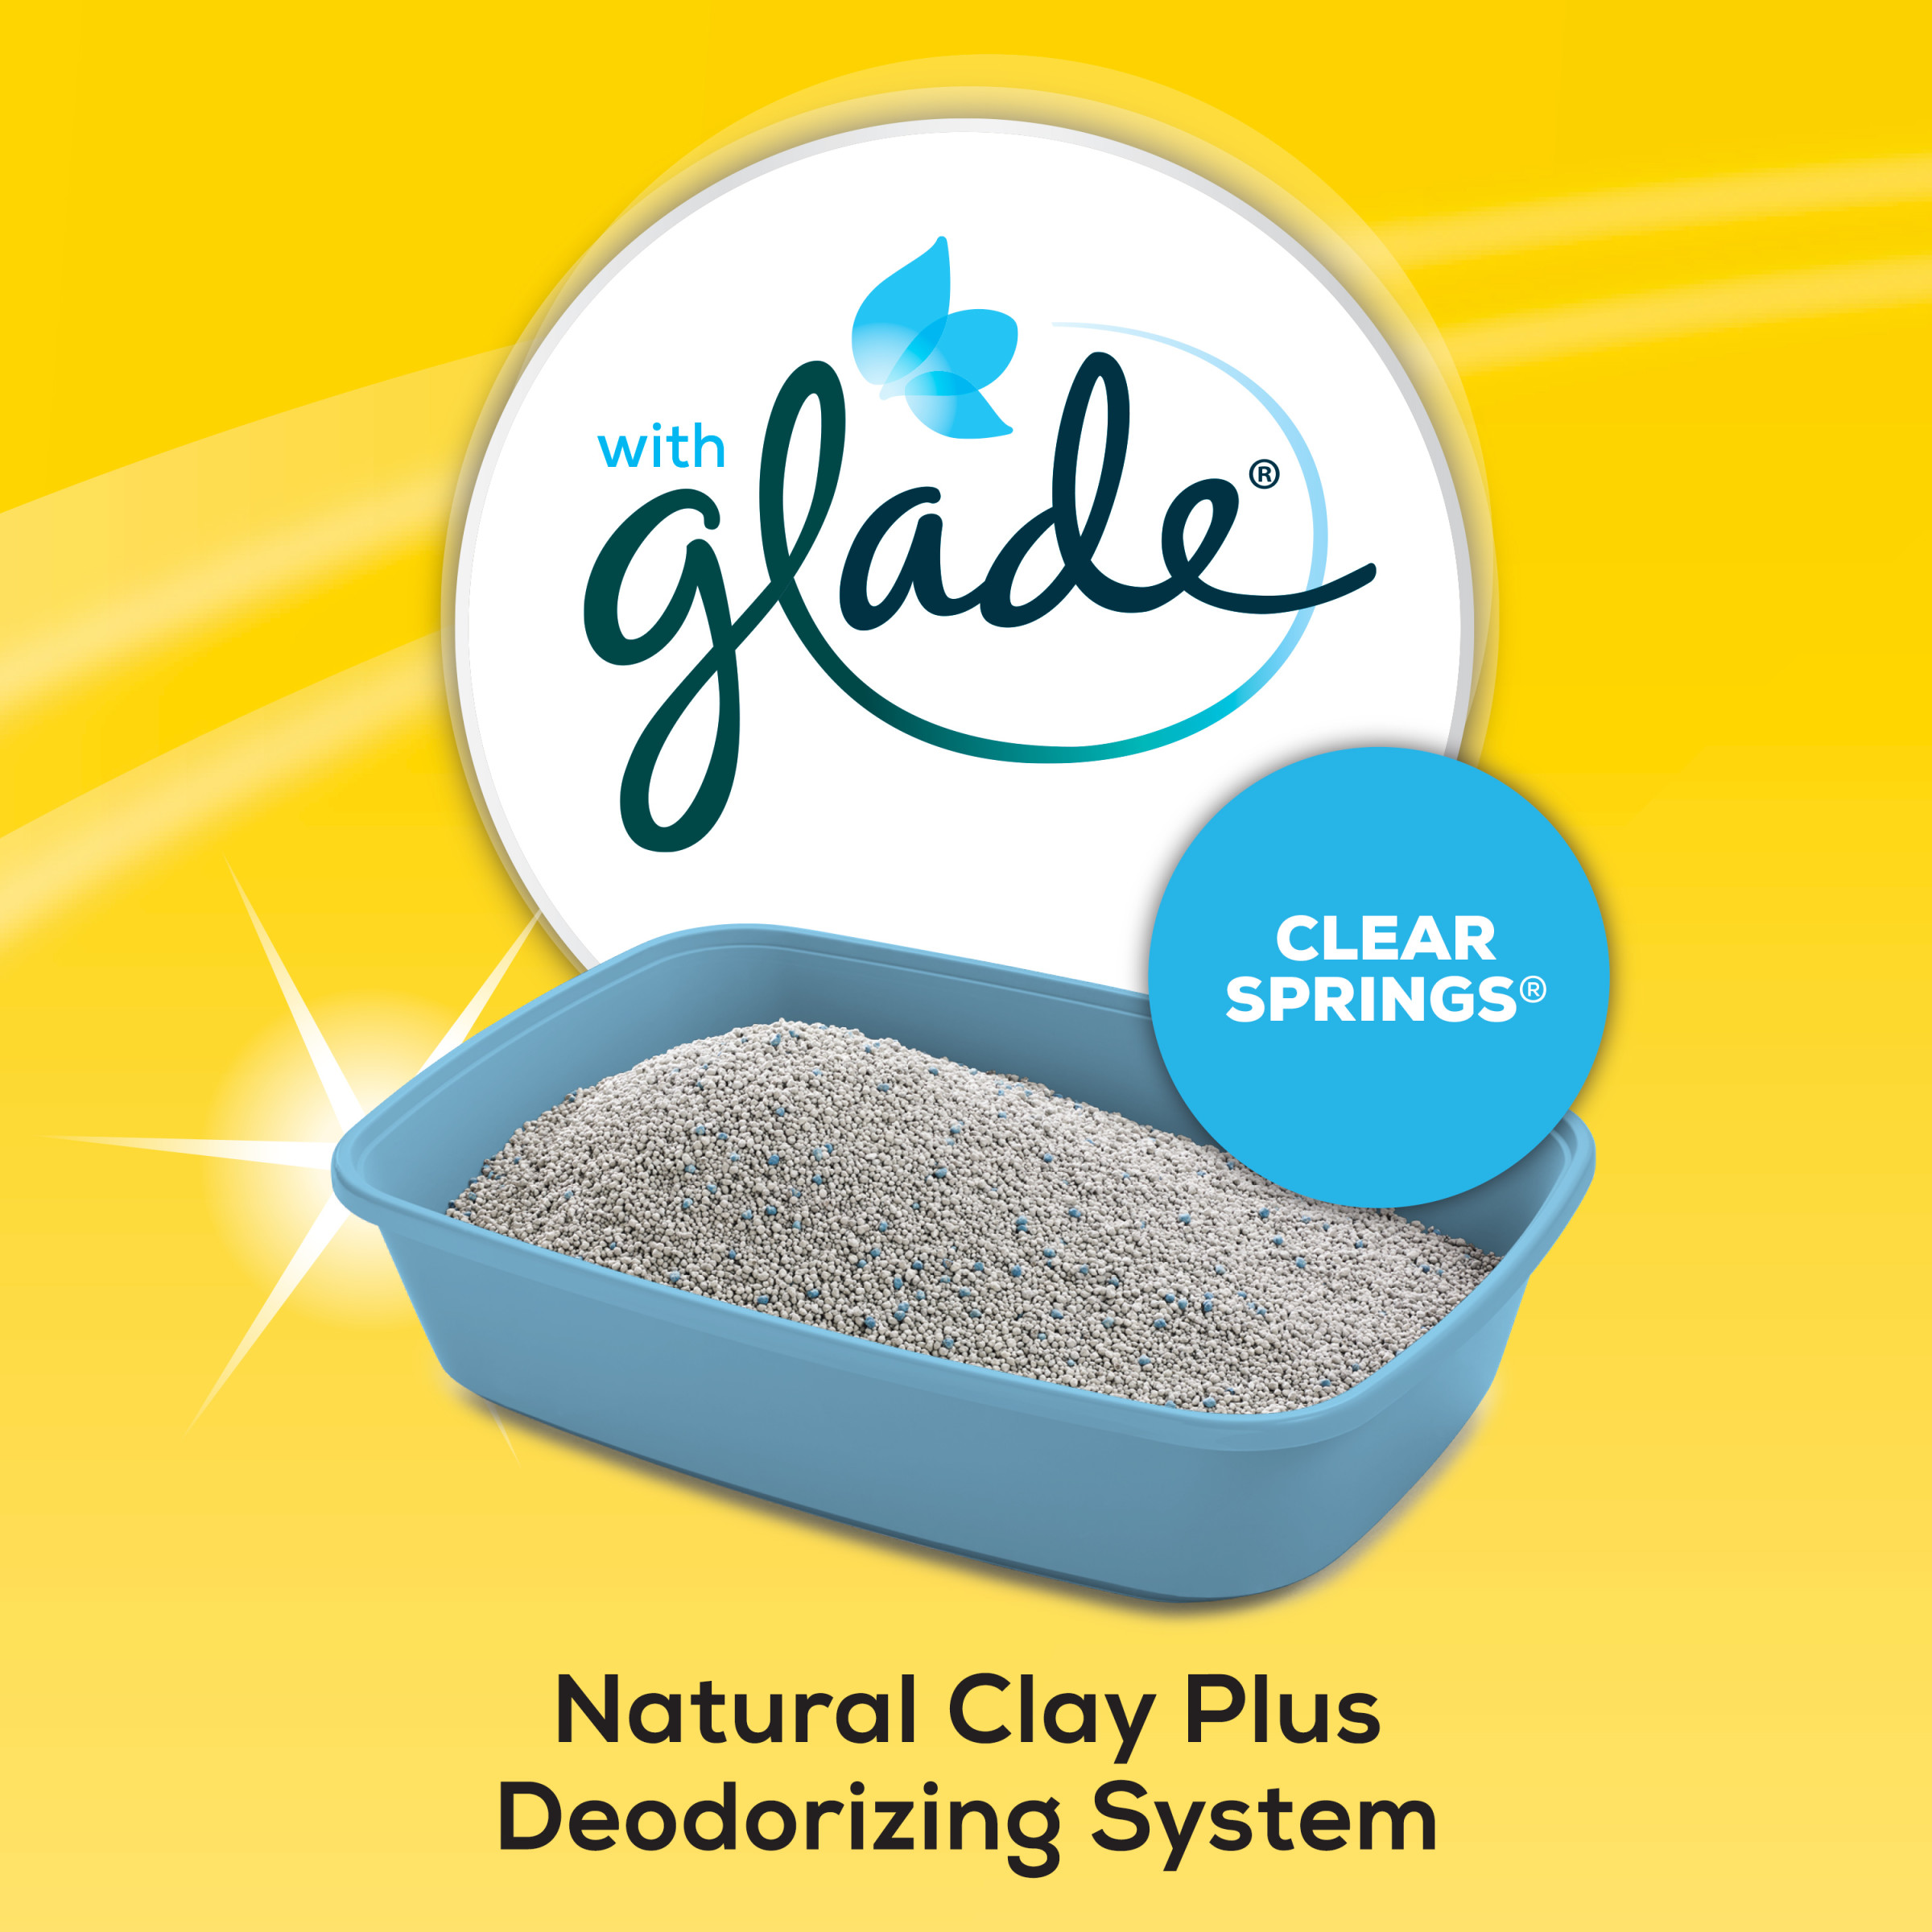 Purina Tidy Cats Clumping Multi Cat Litter, Glade Clear Springs, 20 lb. Jug - image 3 of 9